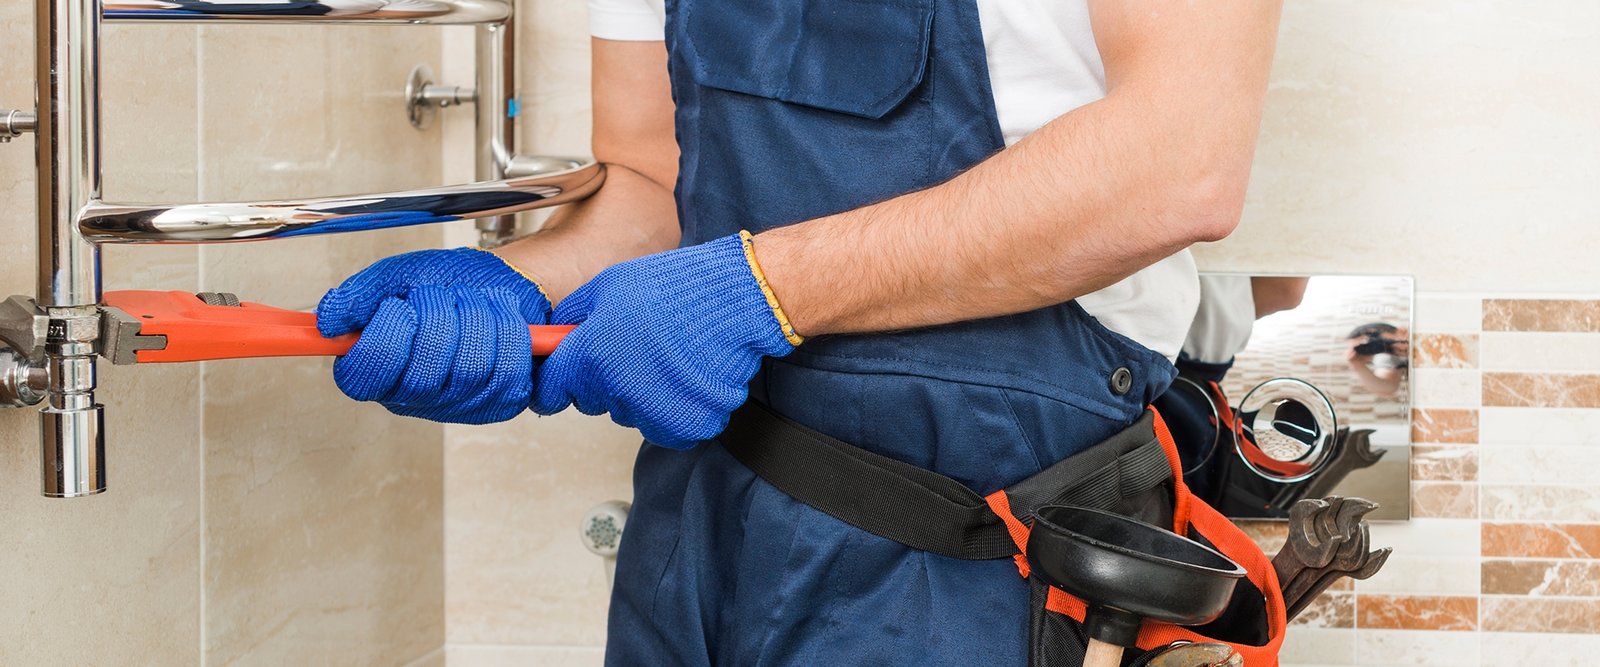 The Ultimate Guide to Choosing the Perfect Plumber: Tips and Tricks